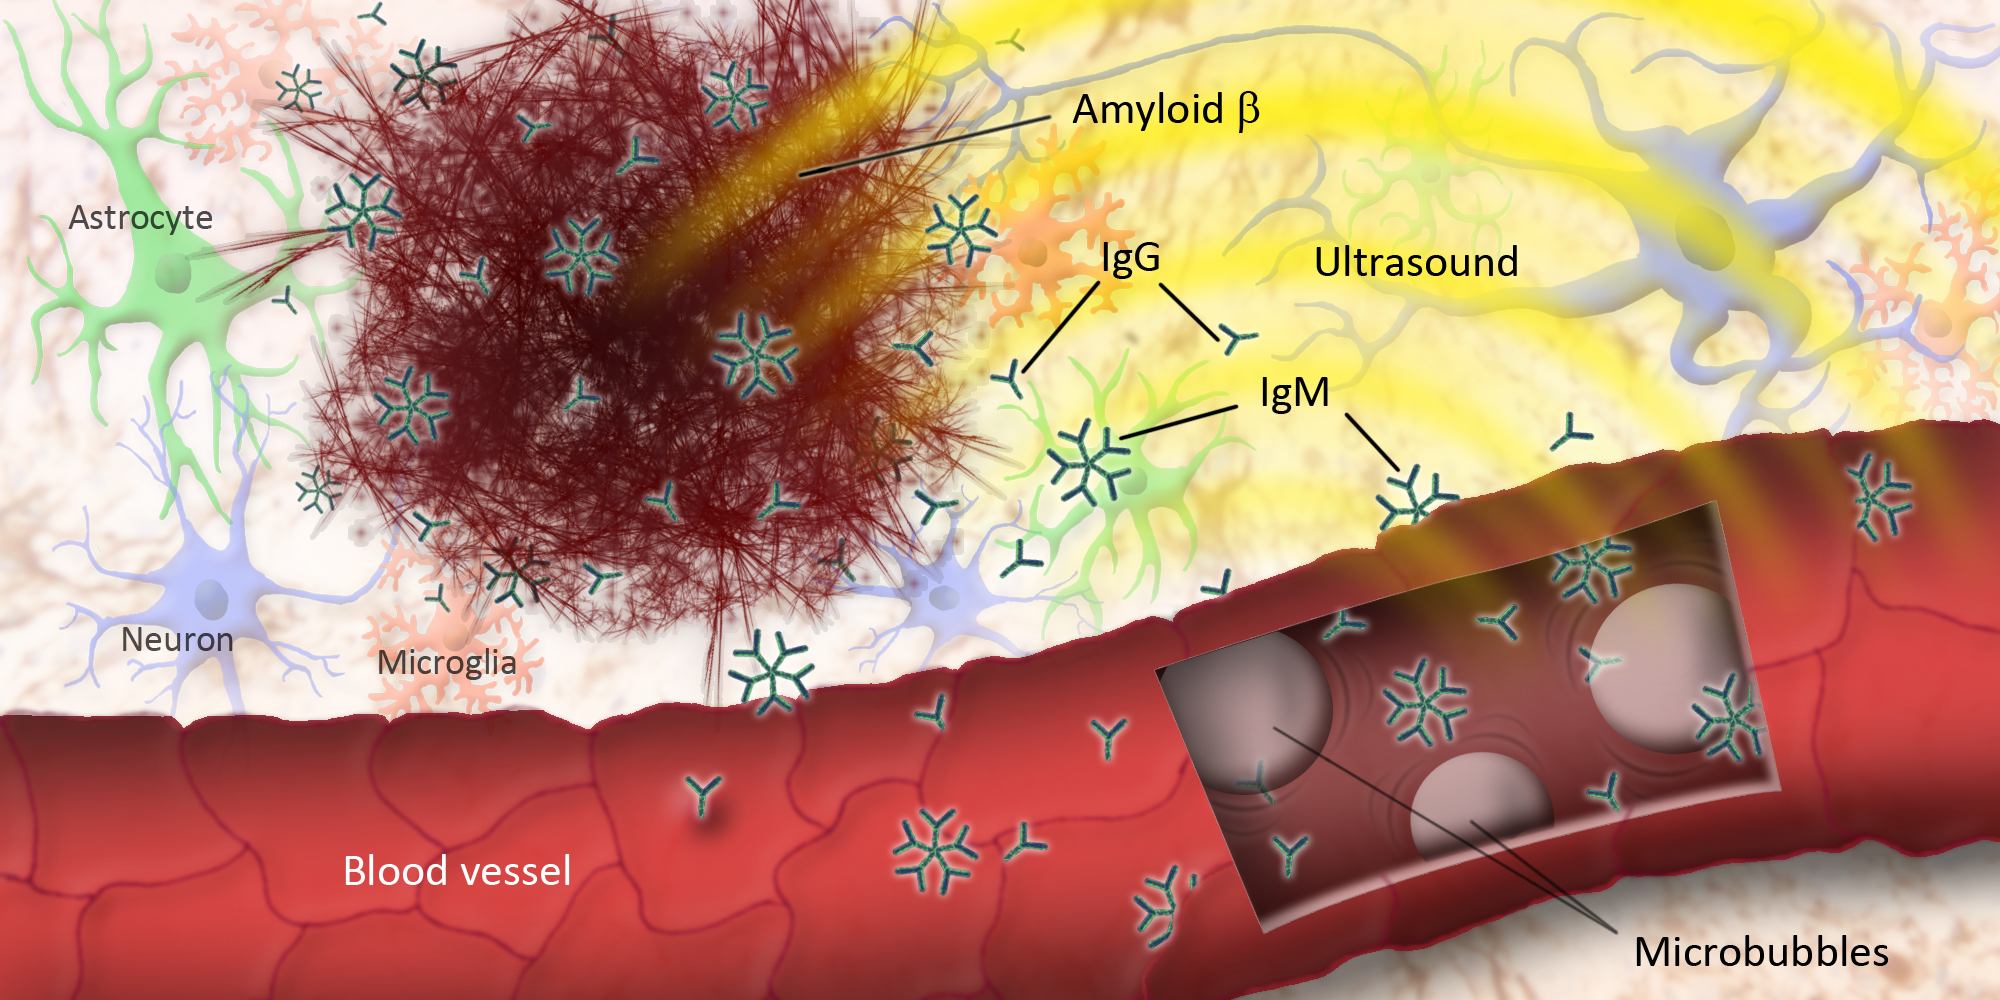 Ultrasound vibrates microbubbles injected into the blood, allowing natural antibodies (IgG and IgM) and glial cells (astrocytes and microglia) to clear amyloid-beta from the brain. 